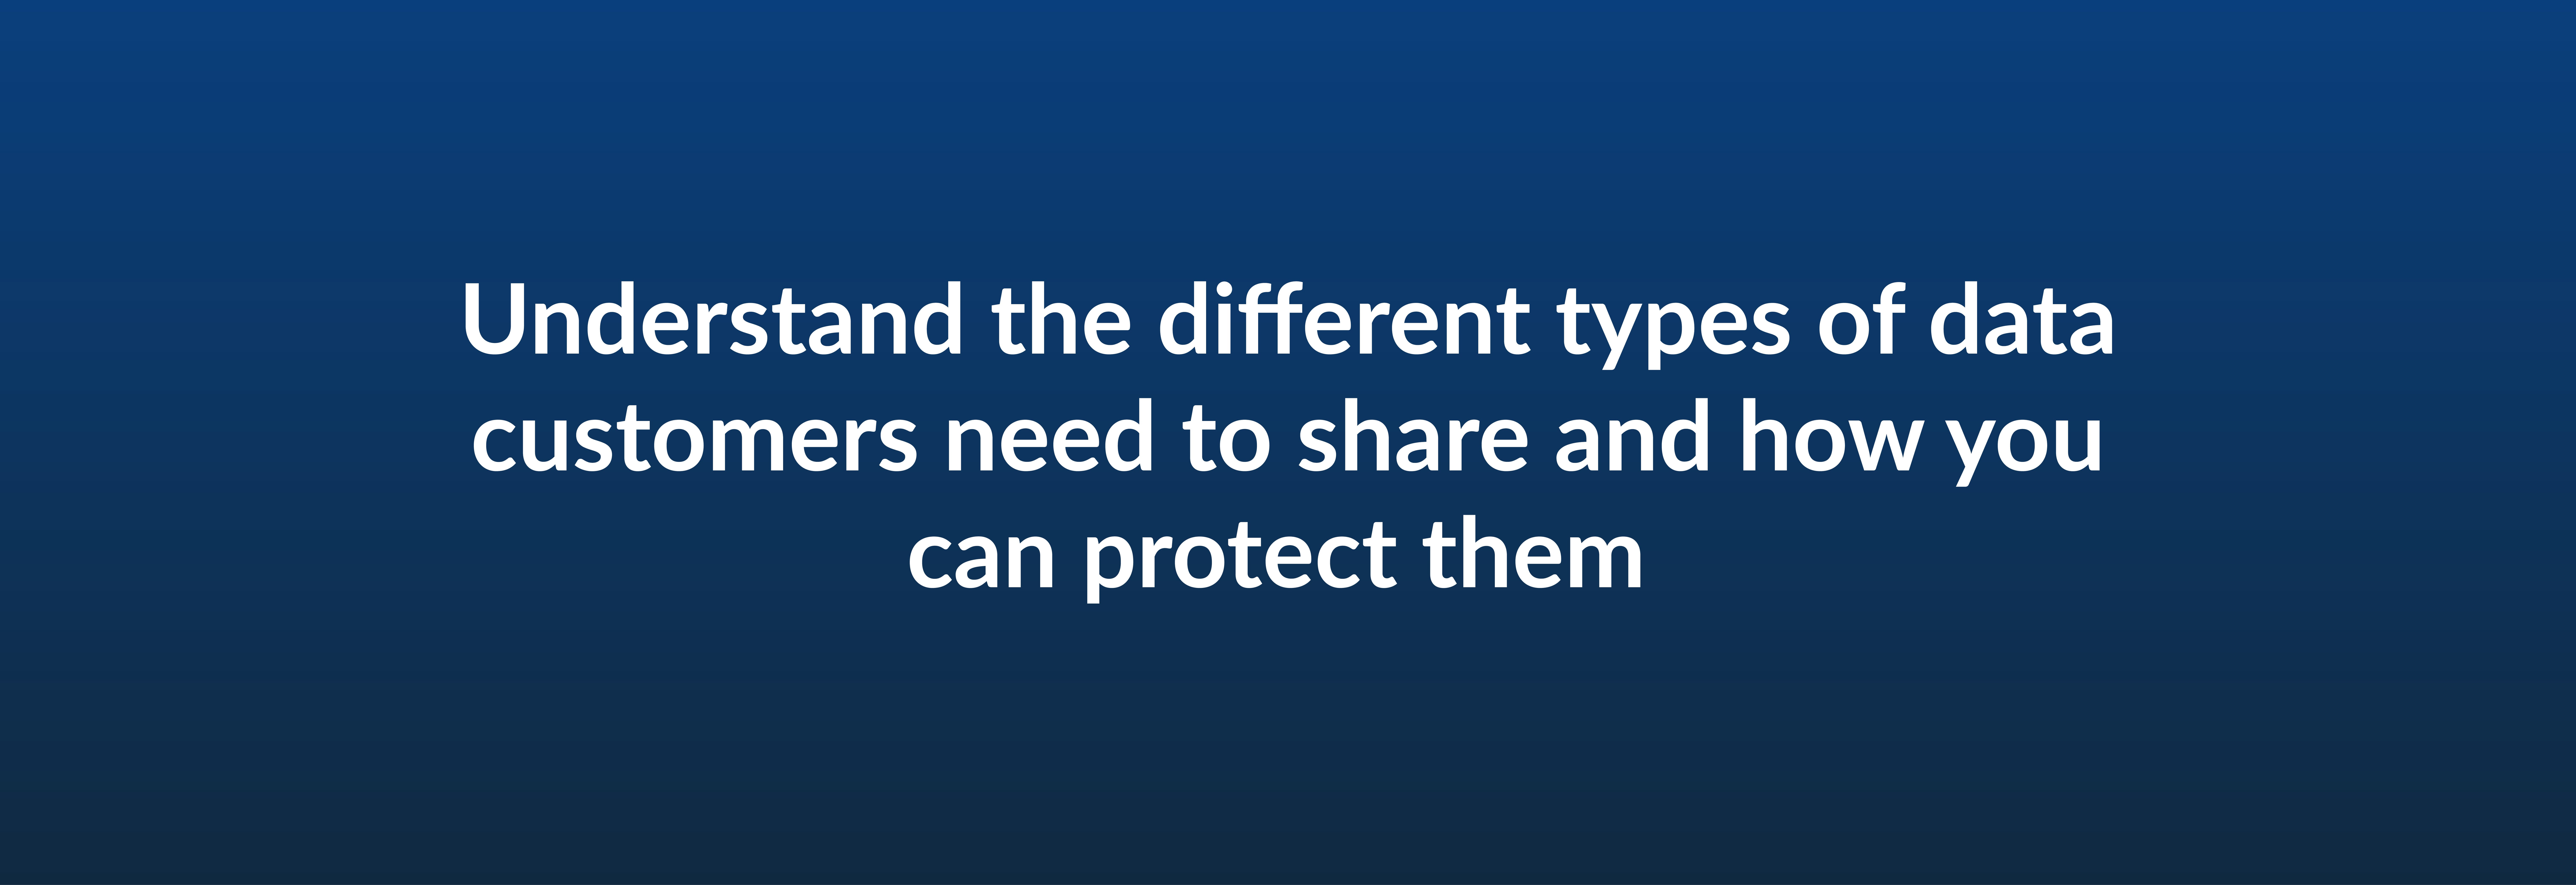 Understand the different types of data customers need to share and how you can protect them